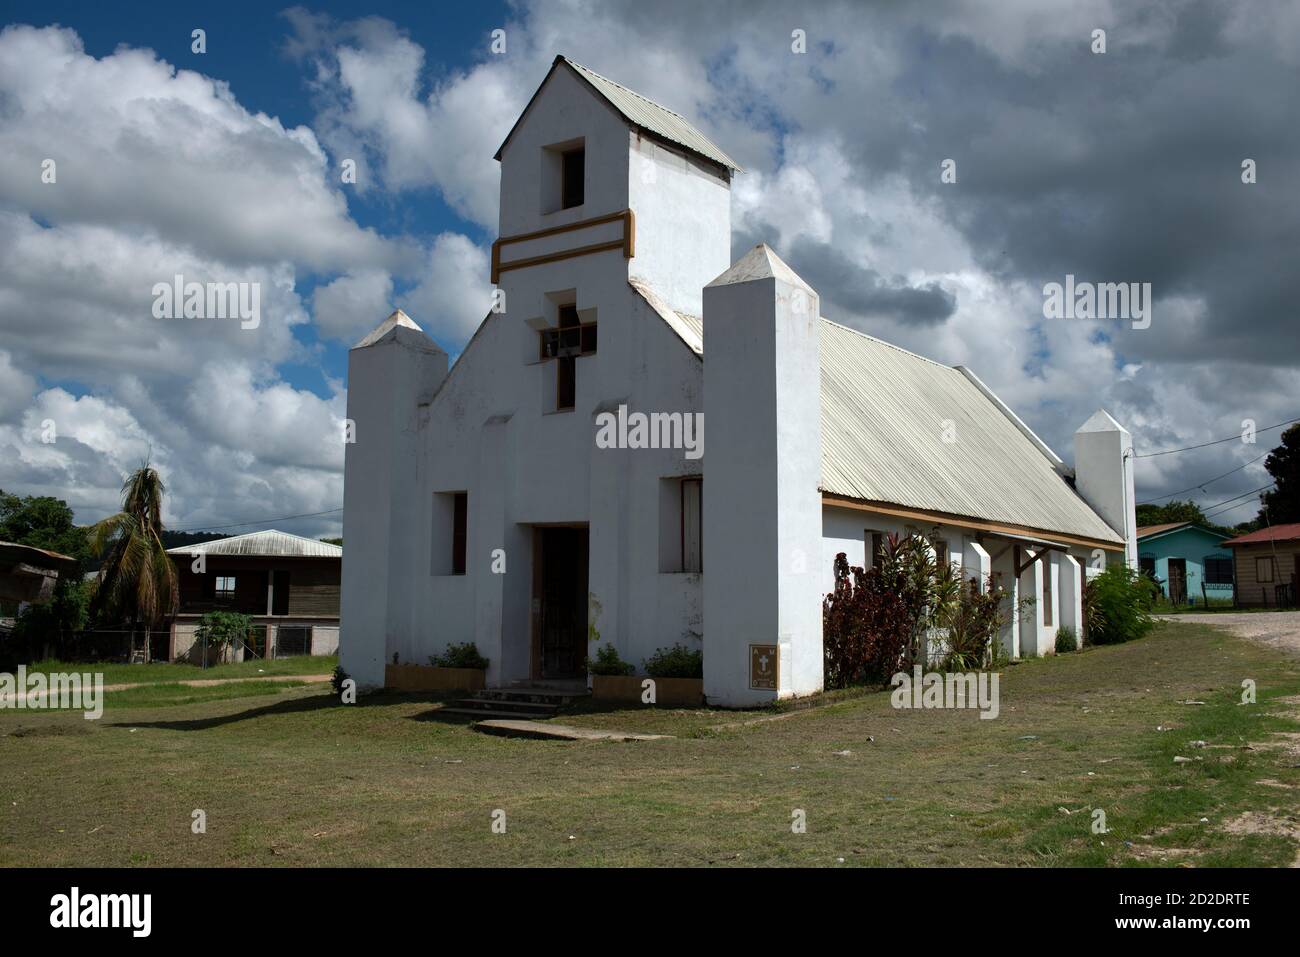 A church in the small Yucatecan Maya community of San Jose Succotz, Cayo District, Belize. Stock Photo